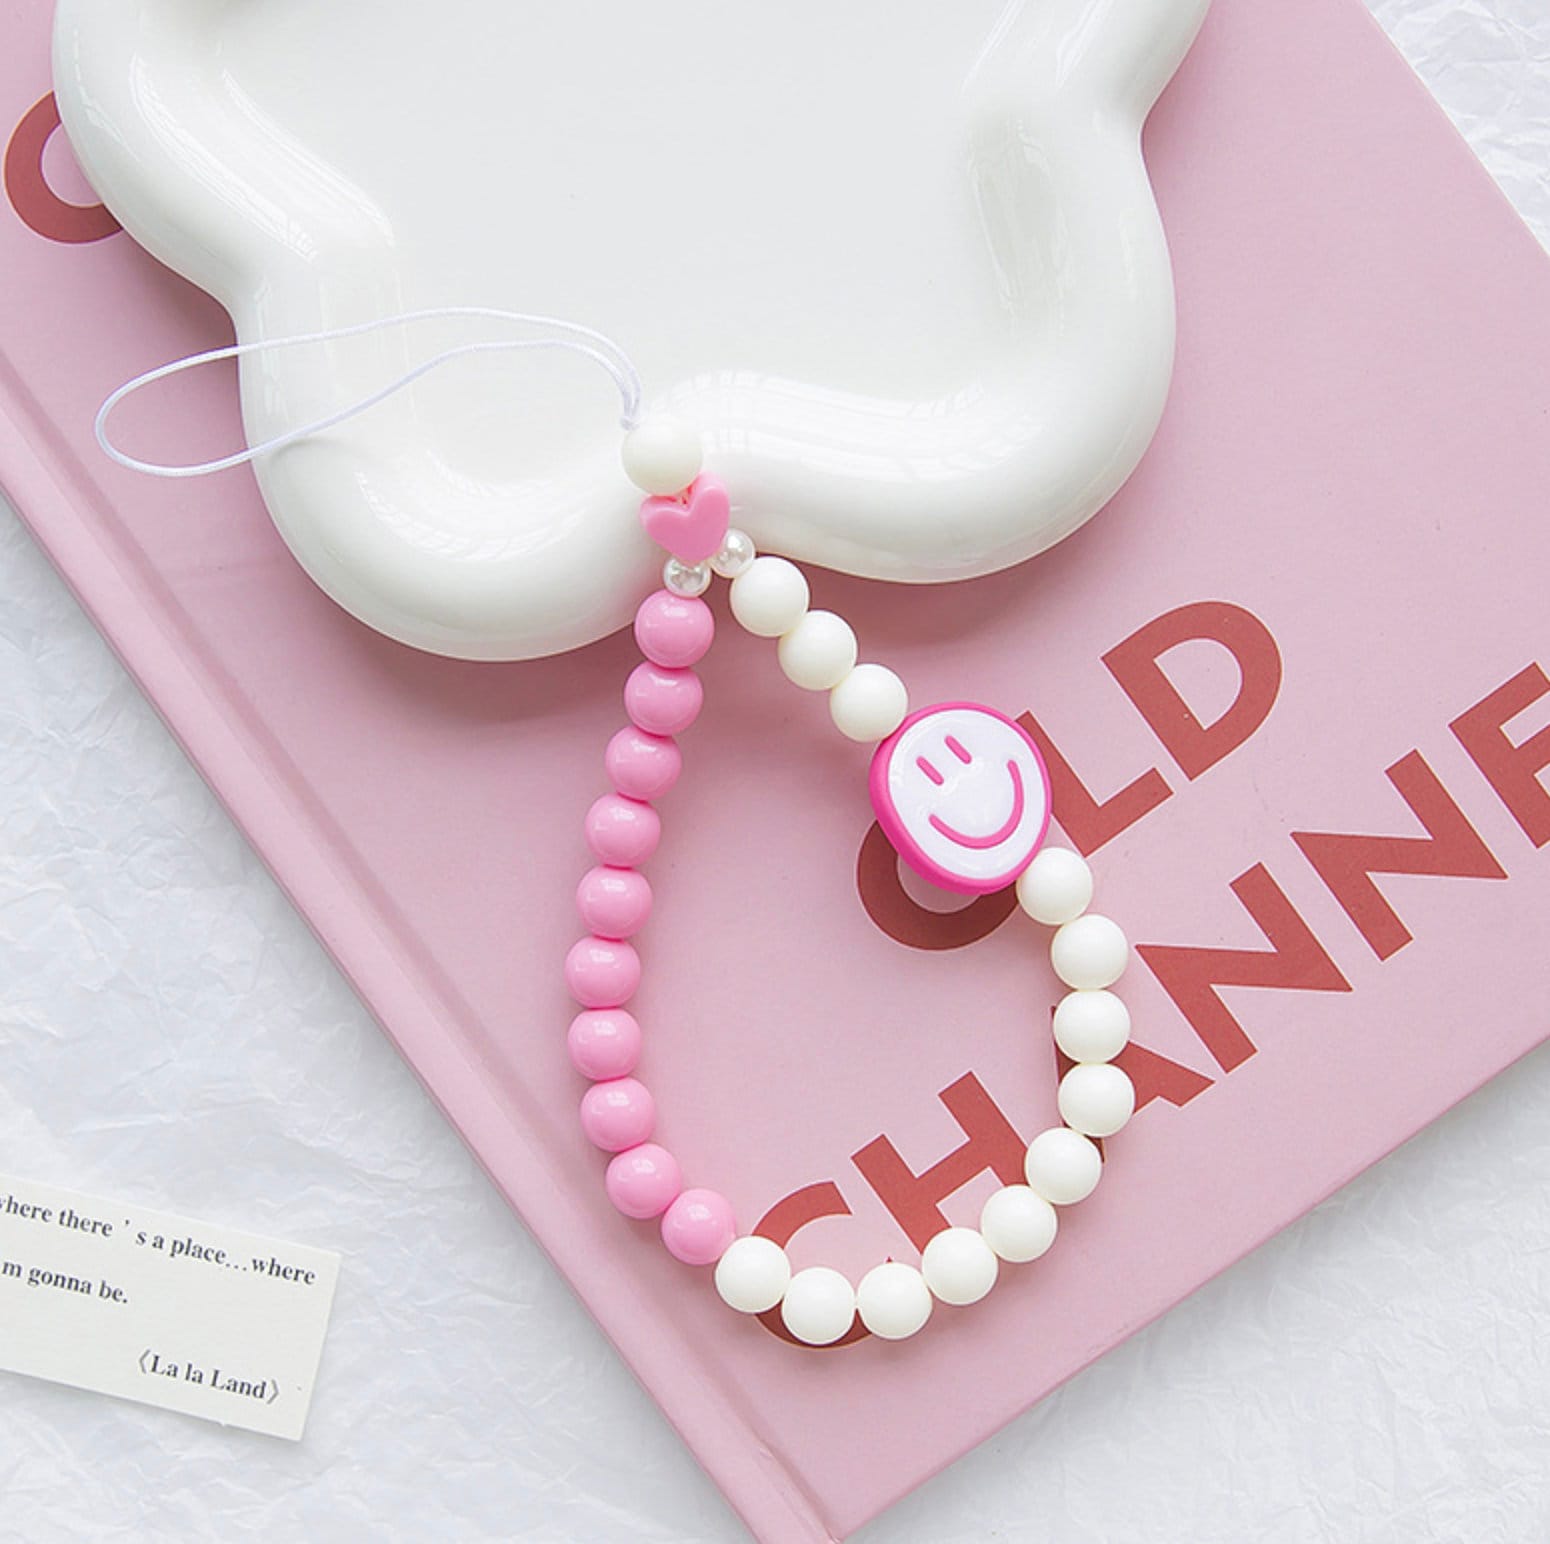 Cute Acrylic Smiling Face Themed Lanyard, Phone Accessories